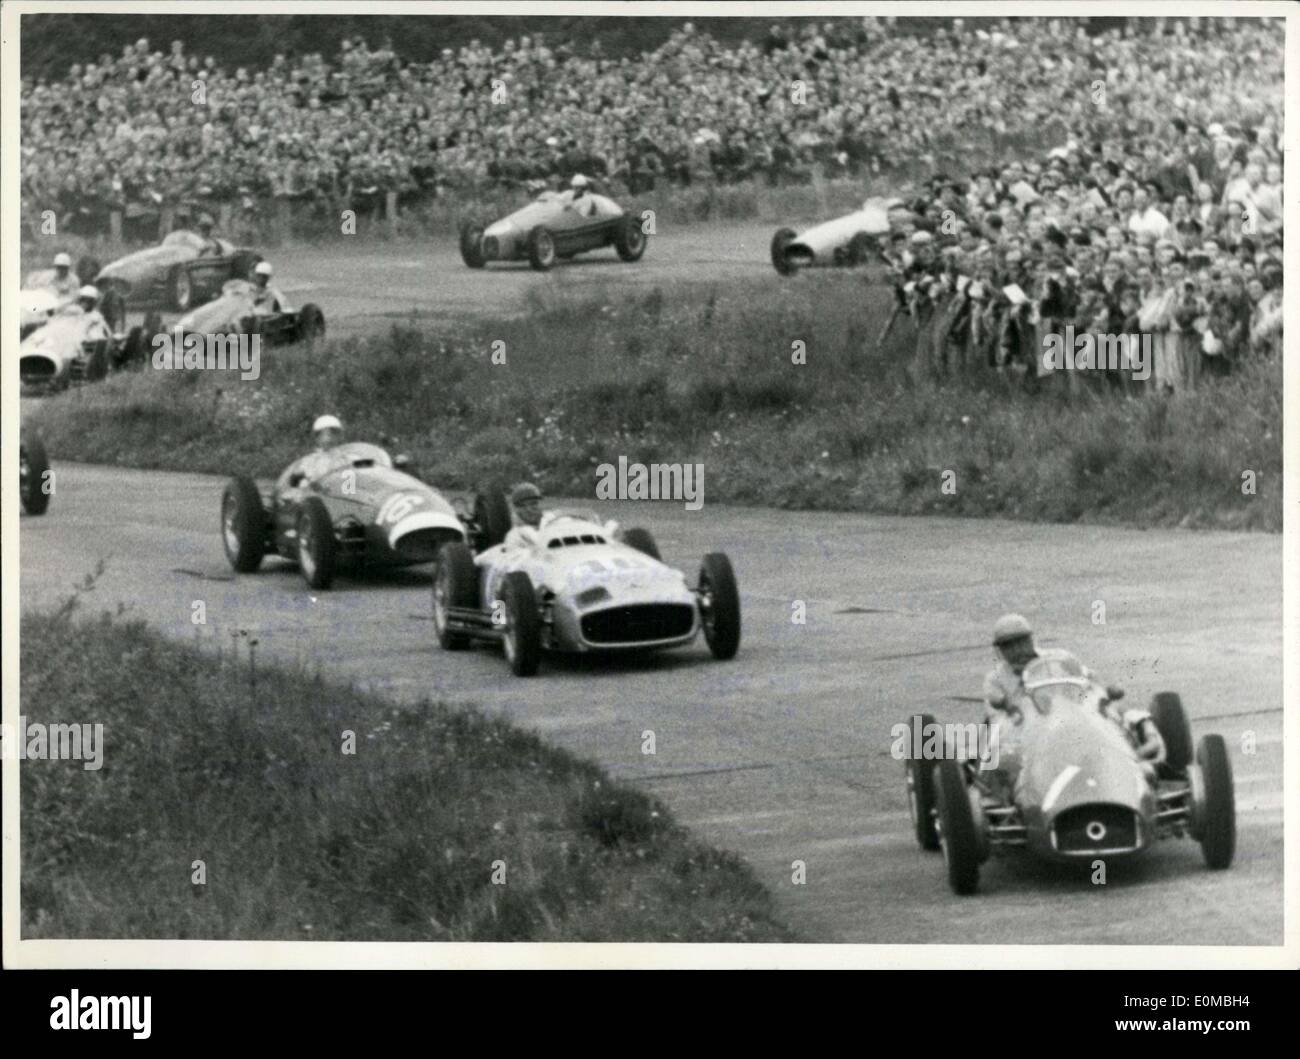 Aug. 01, 1954 - Mercedes wins the ''Grand Prize of Europe.'' Juan M. Pangio, driving a Mercedes, won the Formula 1 race. Pictured here is a scene from the first of 22 rounds. Gonzales is in front with a Ferrari, while Pangio follows in second. Stirling Moss is in his Maserati in third. Stock Photo